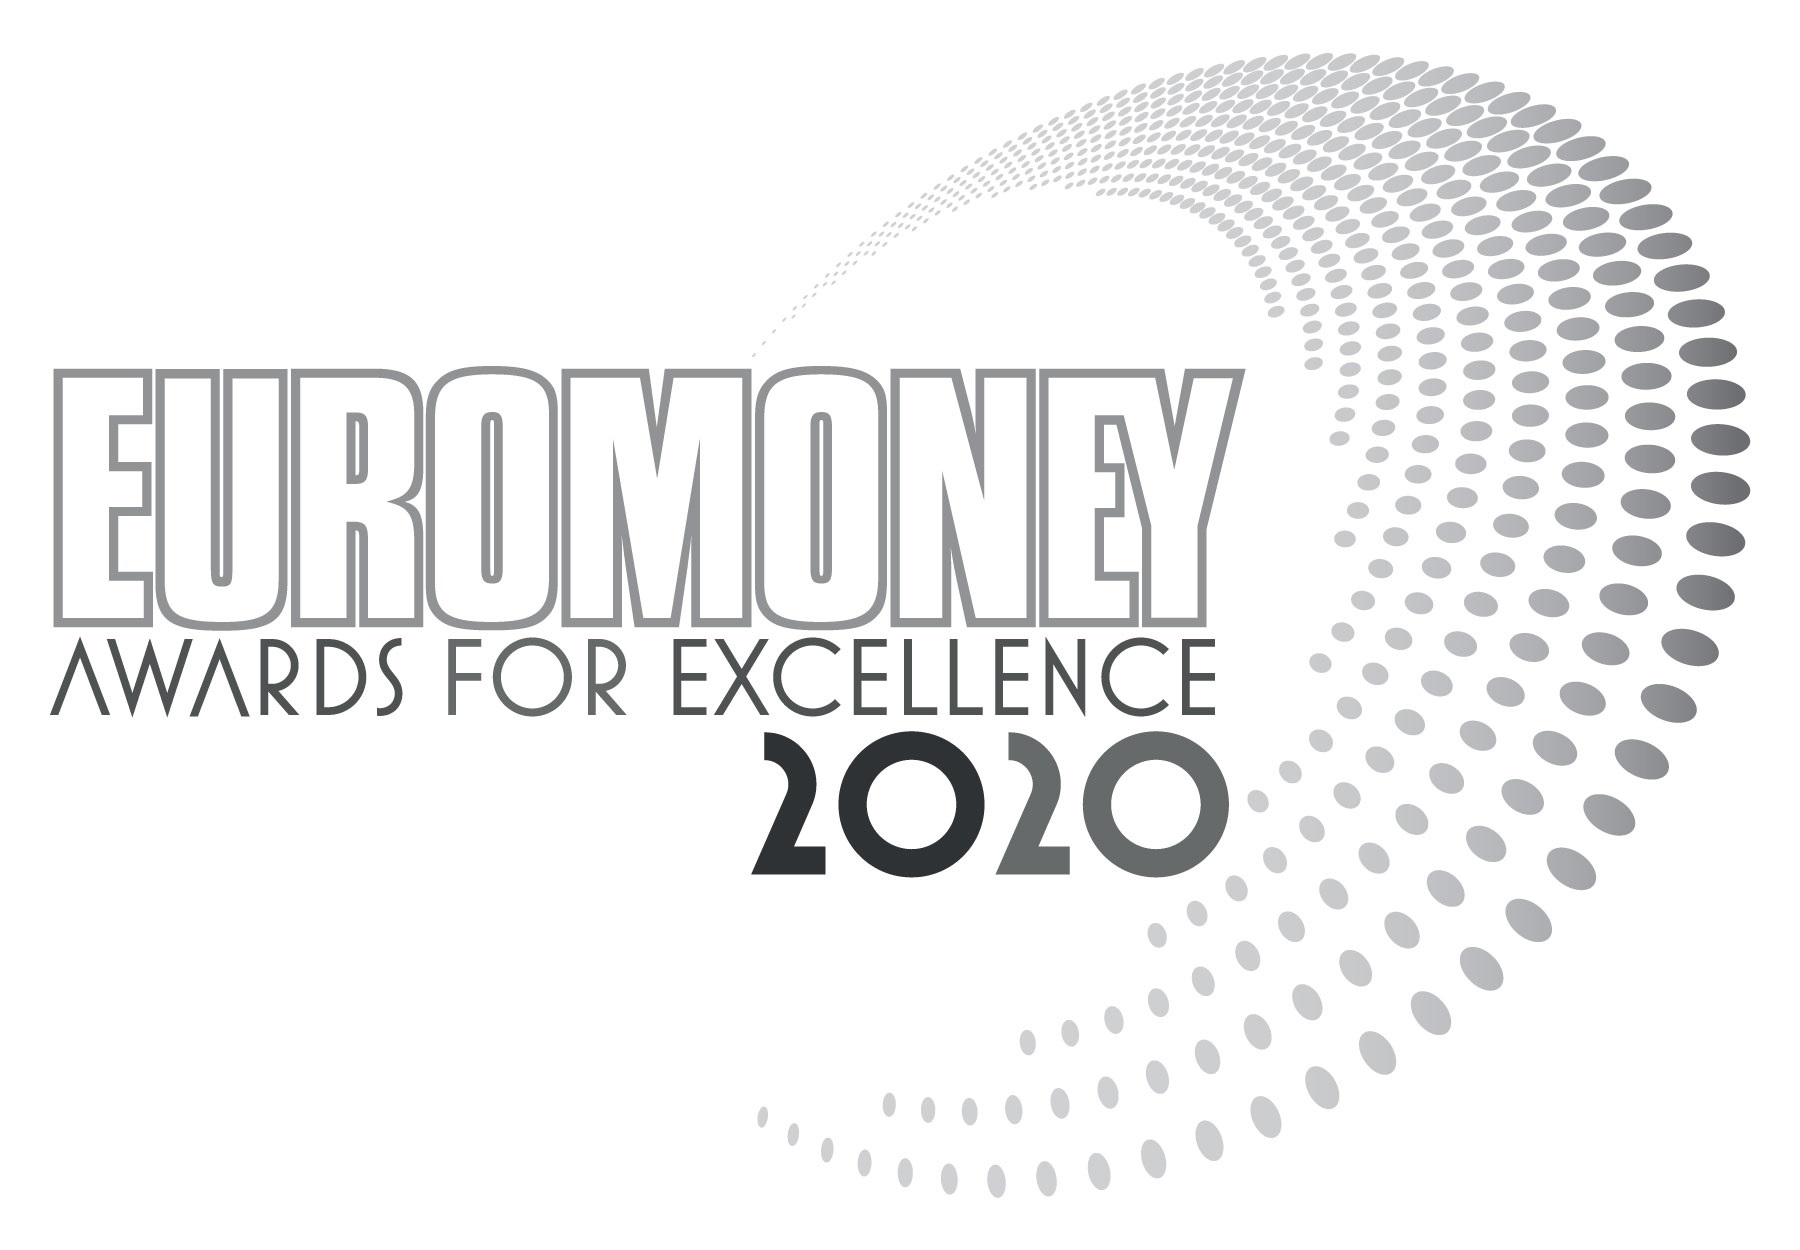 Euromoney awards for excellence 2020 image